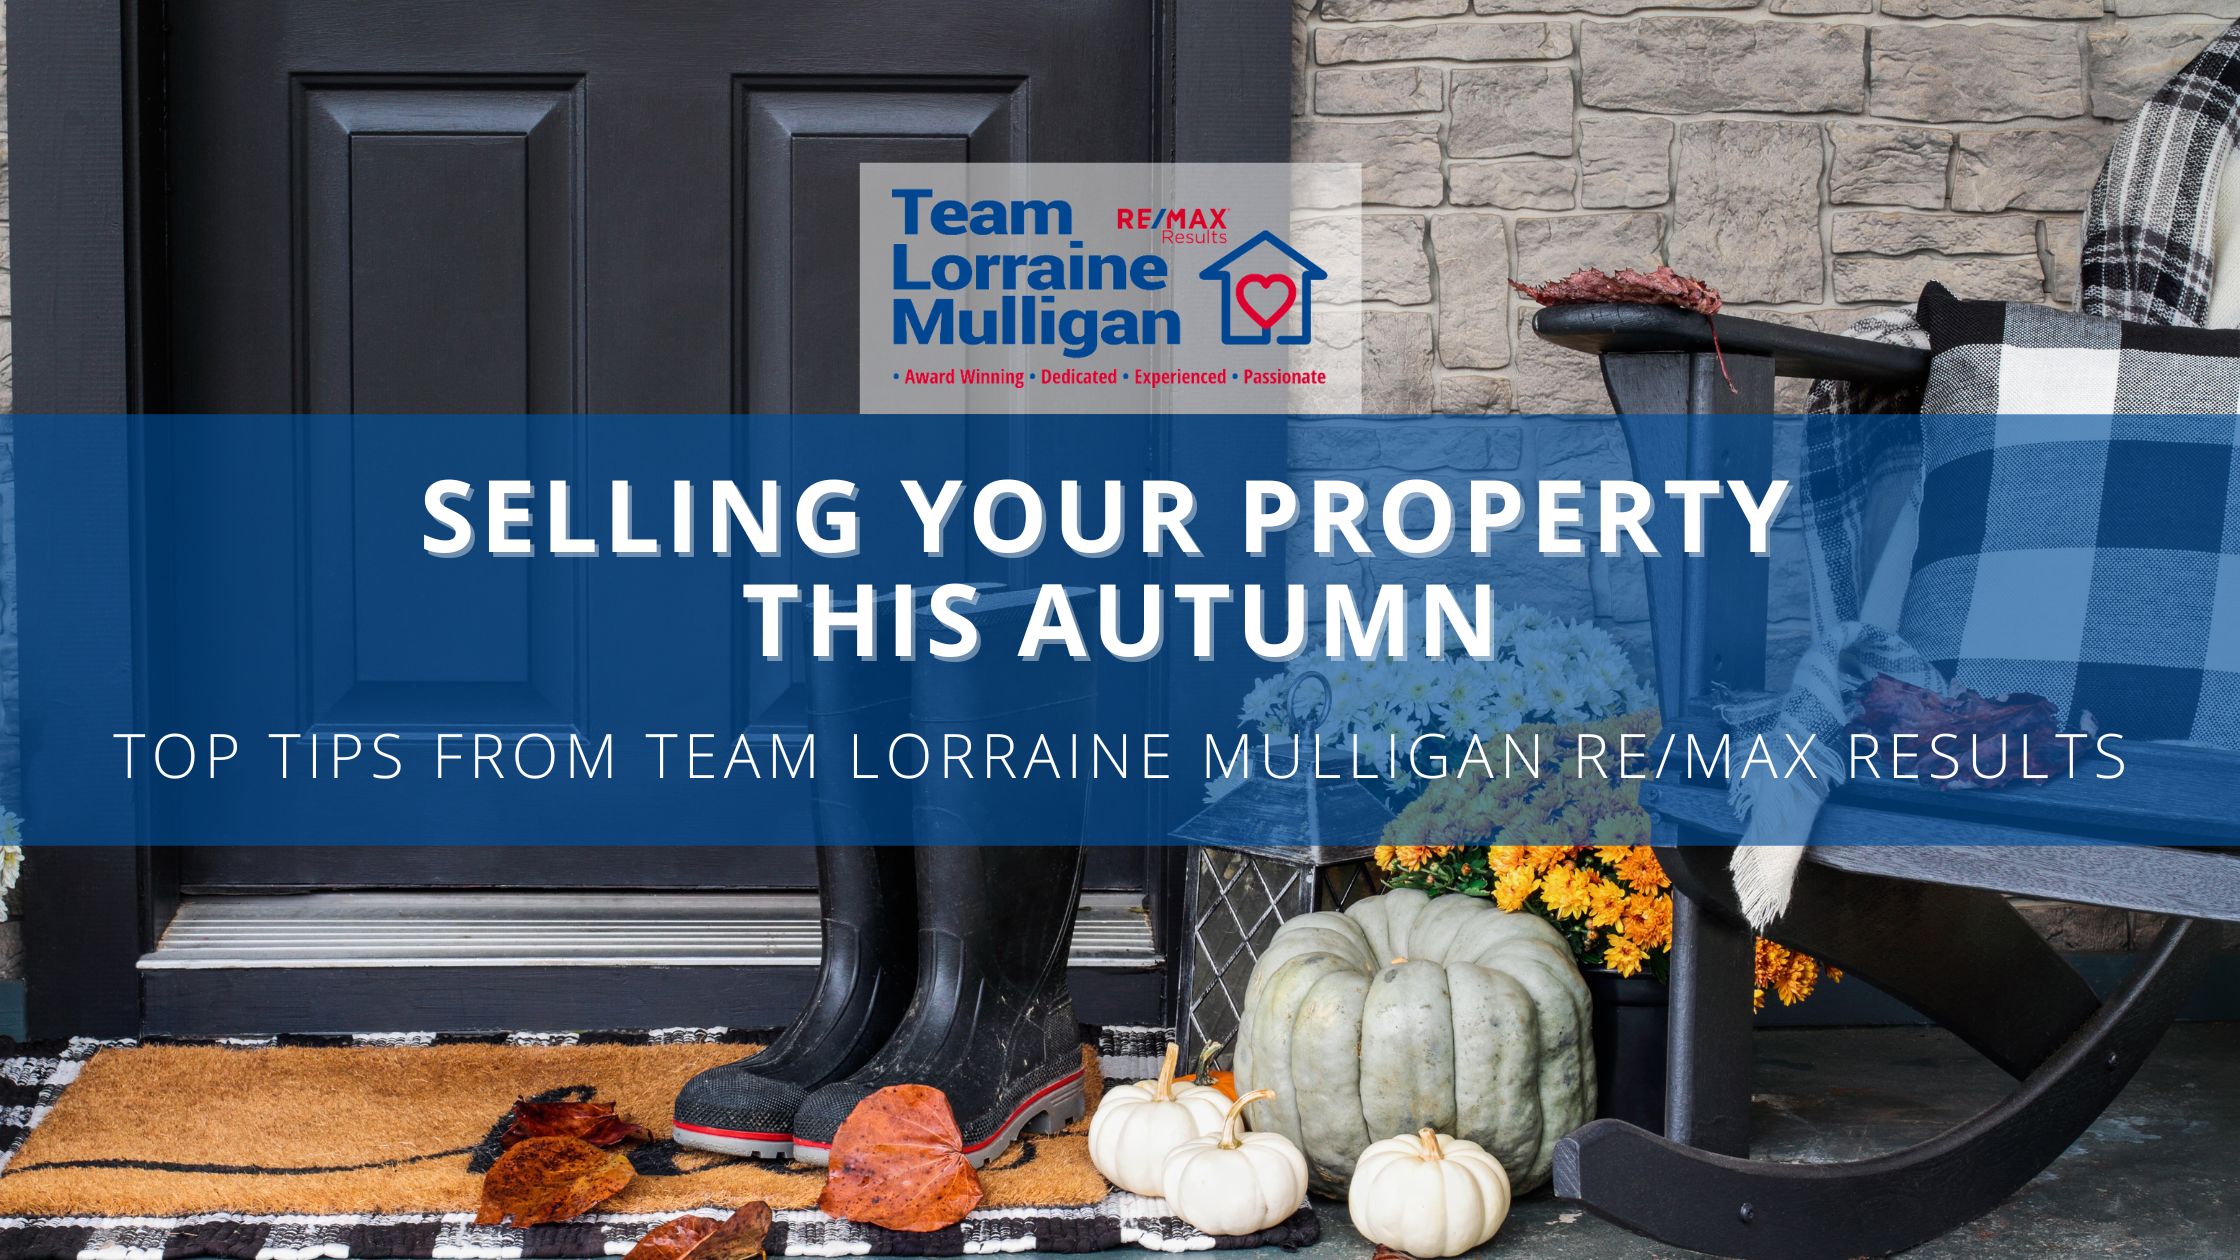 Selling Your Property This Autumn: Top Tips from Team Lorraine Mulligan RE/MAX Results